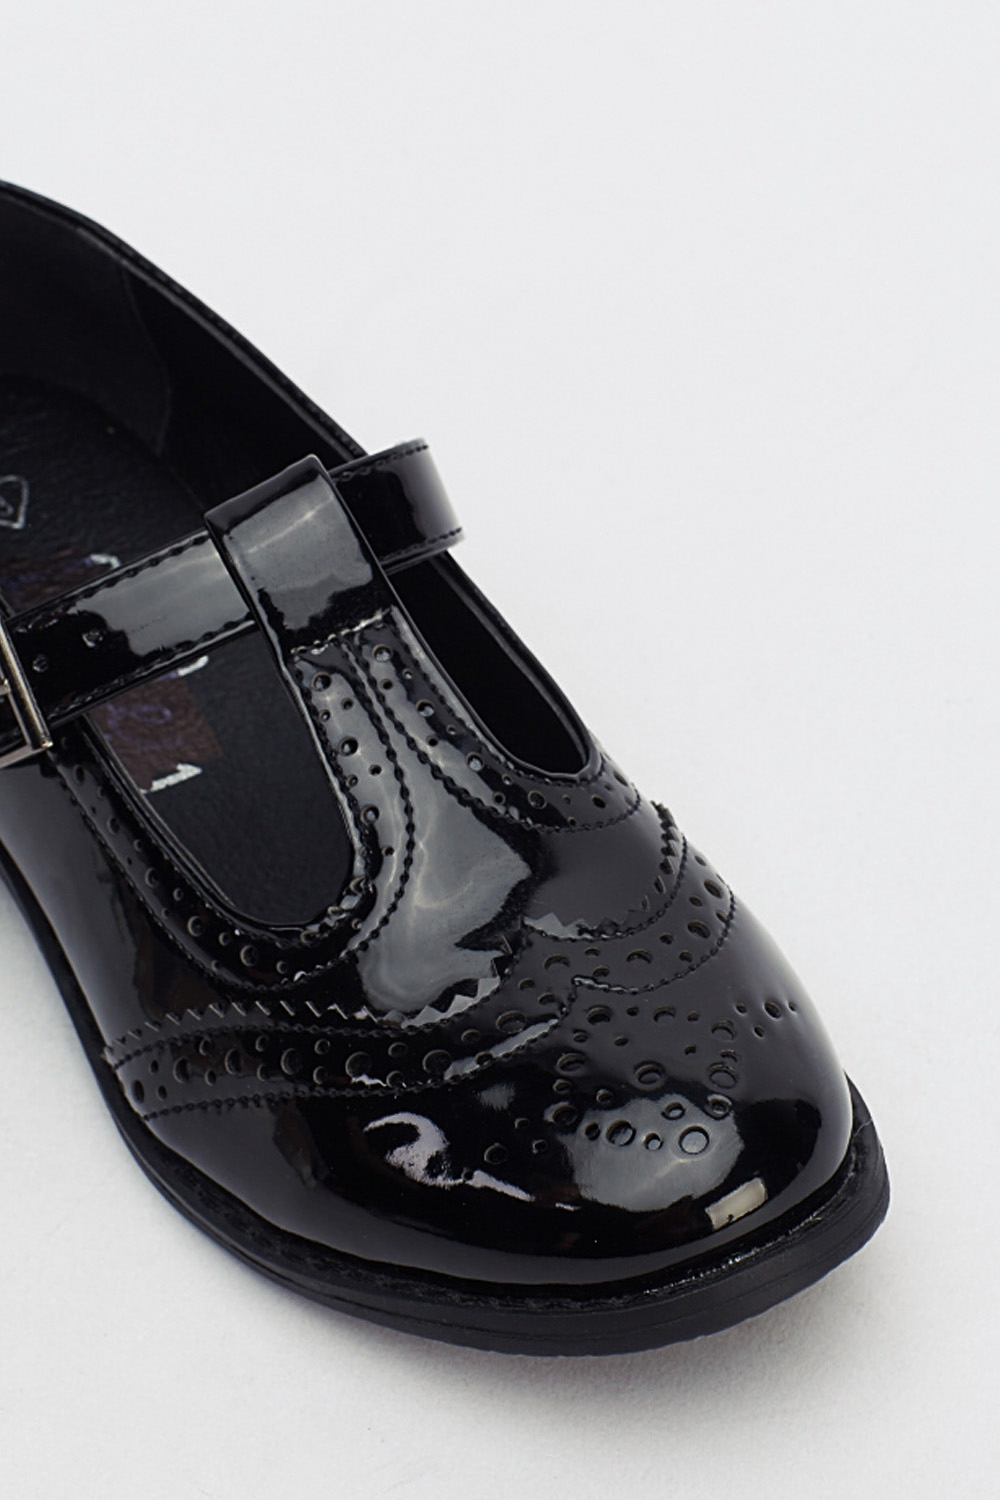 Cut Out Black Brogue Shoes - Just $7